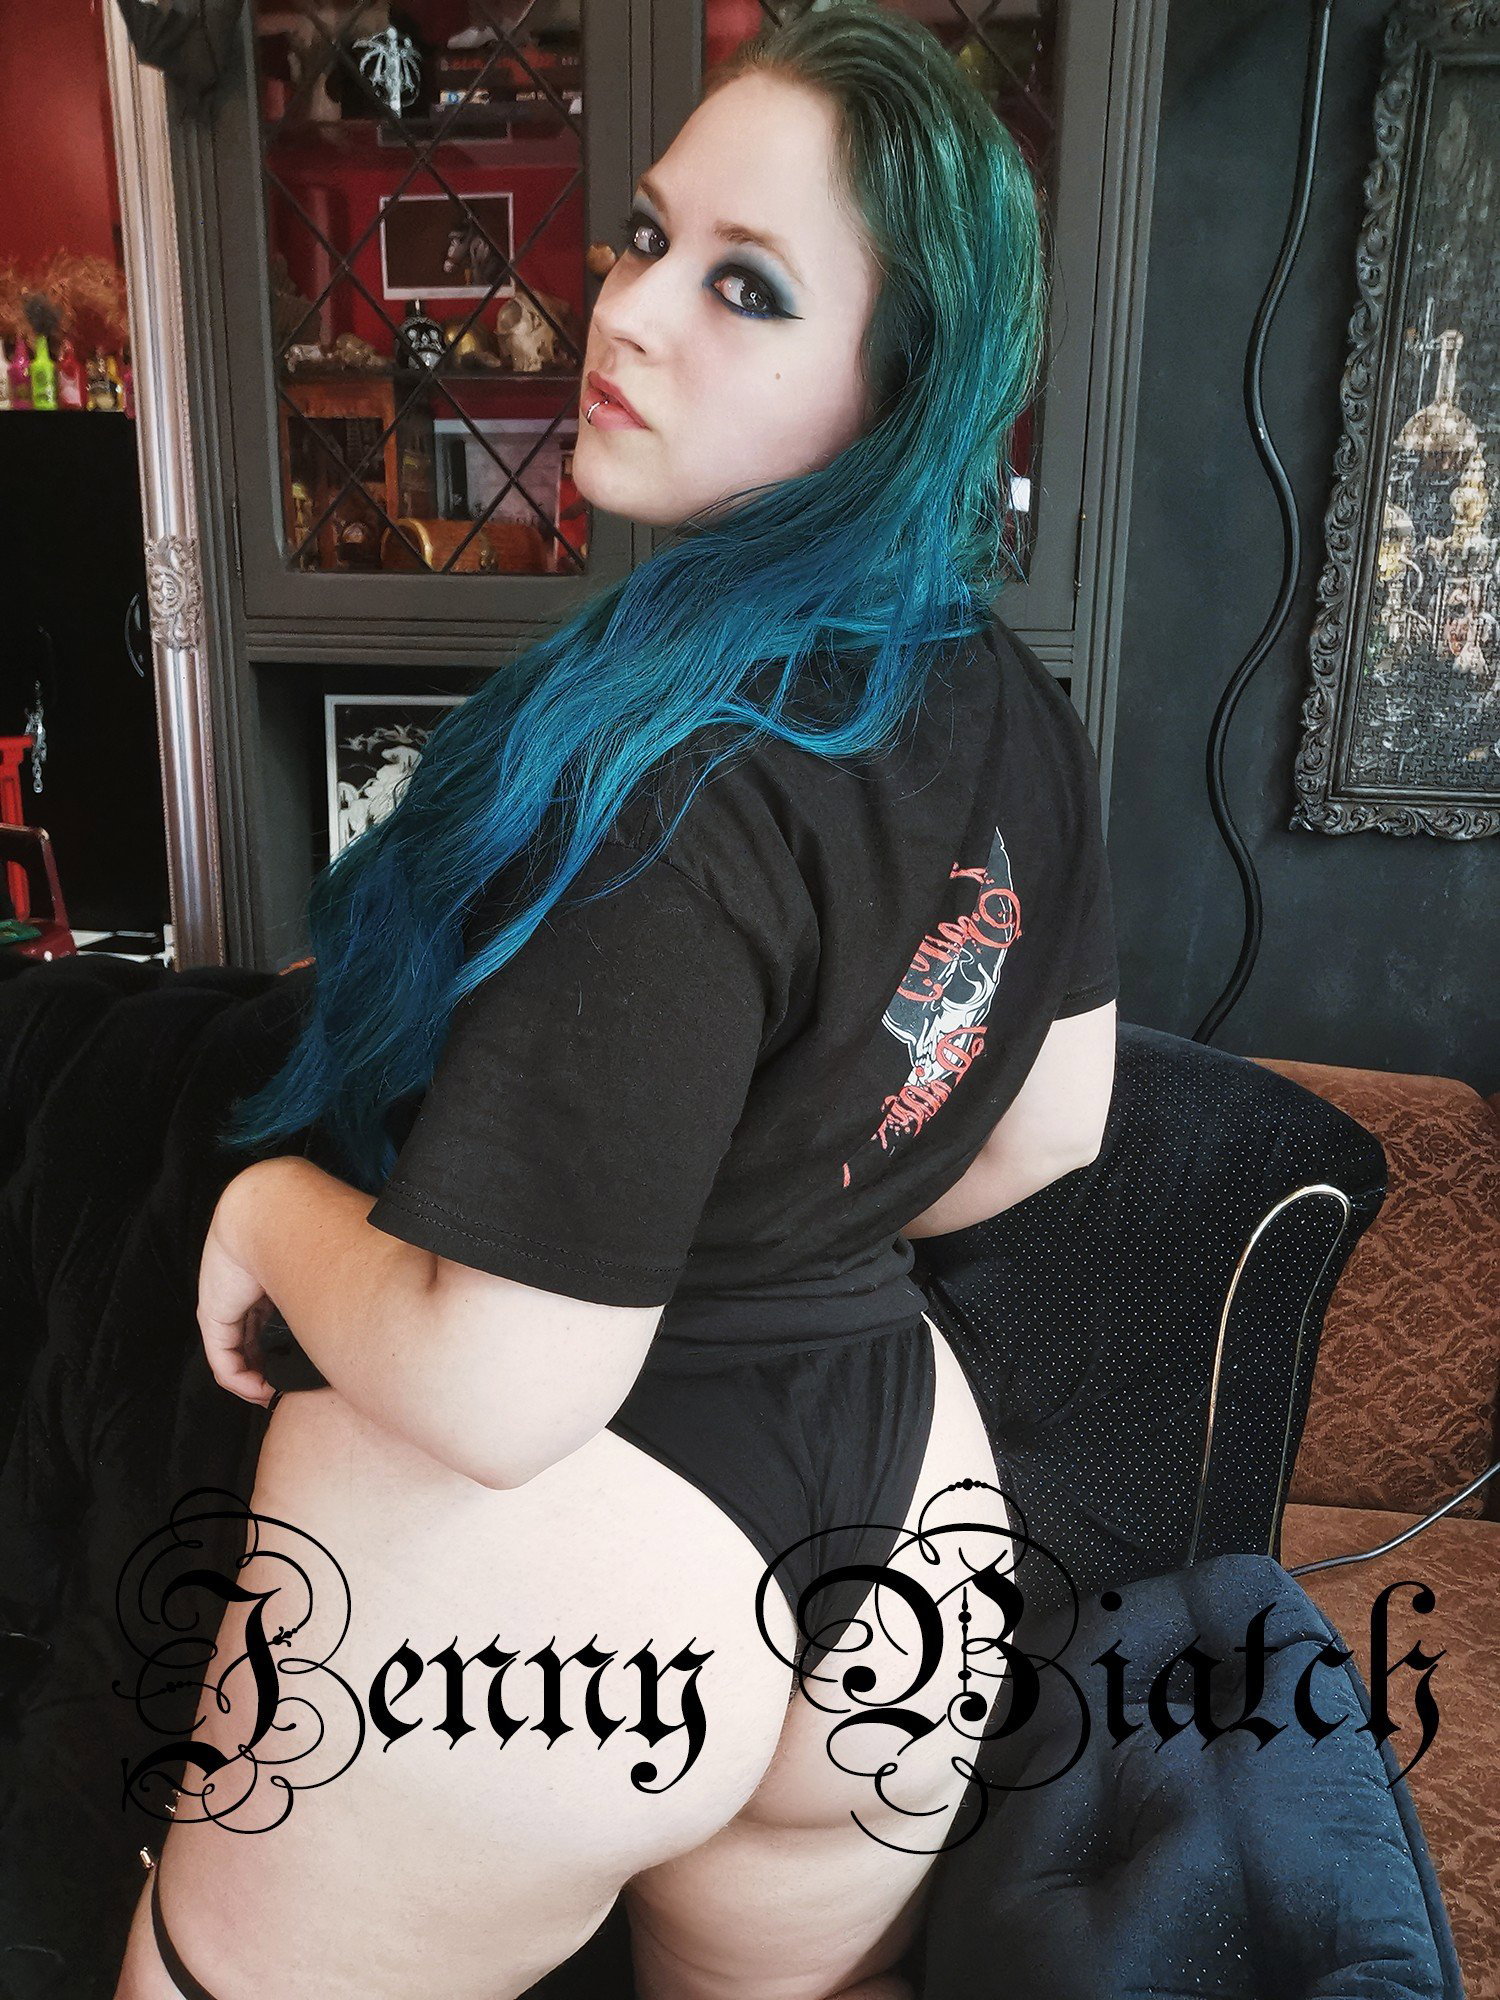 Photo by JennyBiatch with the username @thejennybiatch, who is a verified user,  January 23, 2024 at 10:07 AM and the text says 'Jenny Biatch Nude Leaks, BIG TIDDY GOTH GF - #onlyfans #jennybiatchnude #thejennybiatch #naked #porn #leak (IGNORE this title, I'm fighting with a rat who leaked my pics)'